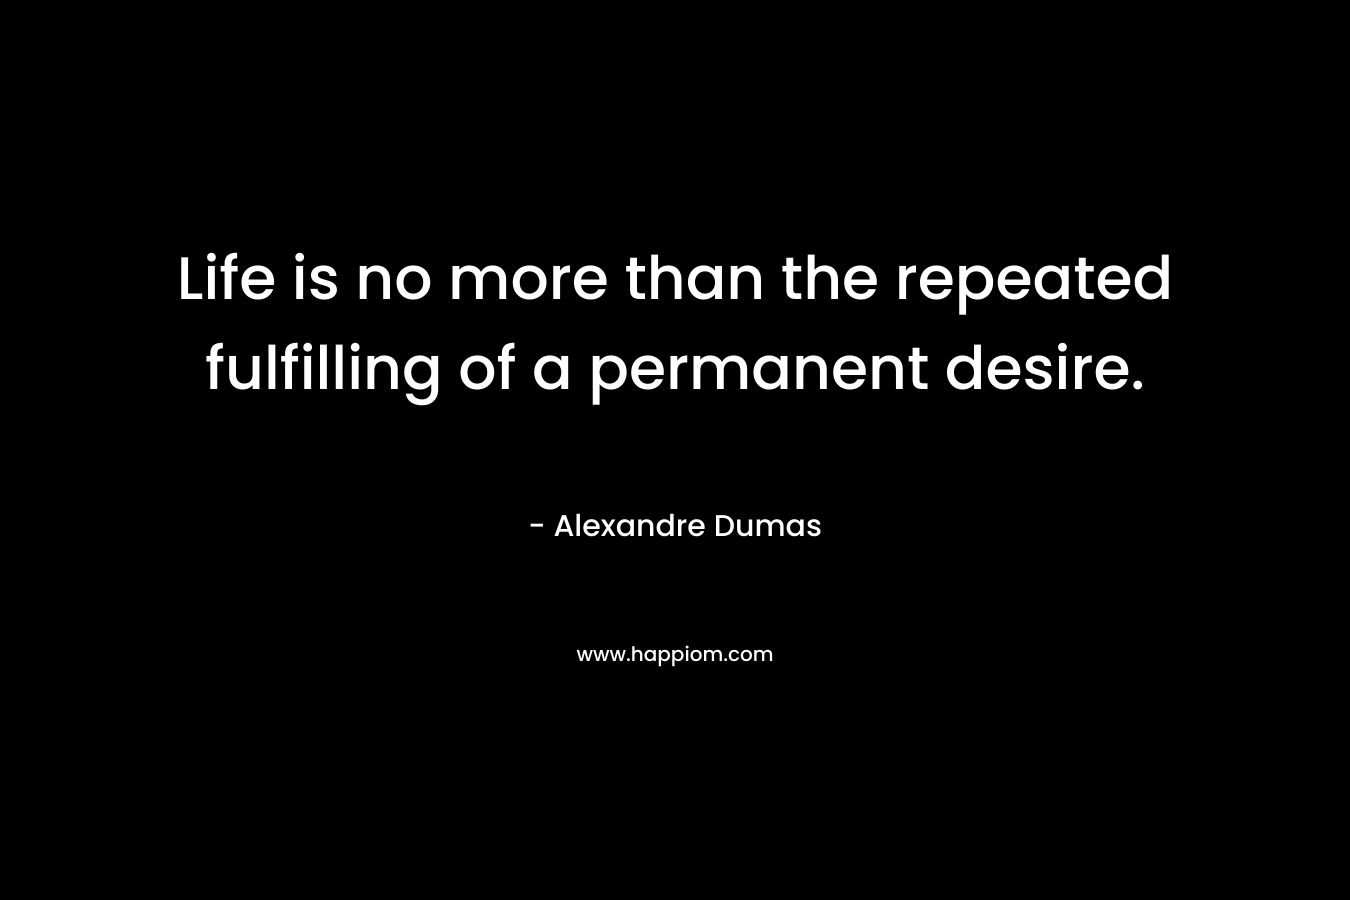 Life is no more than the repeated fulfilling of a permanent desire.